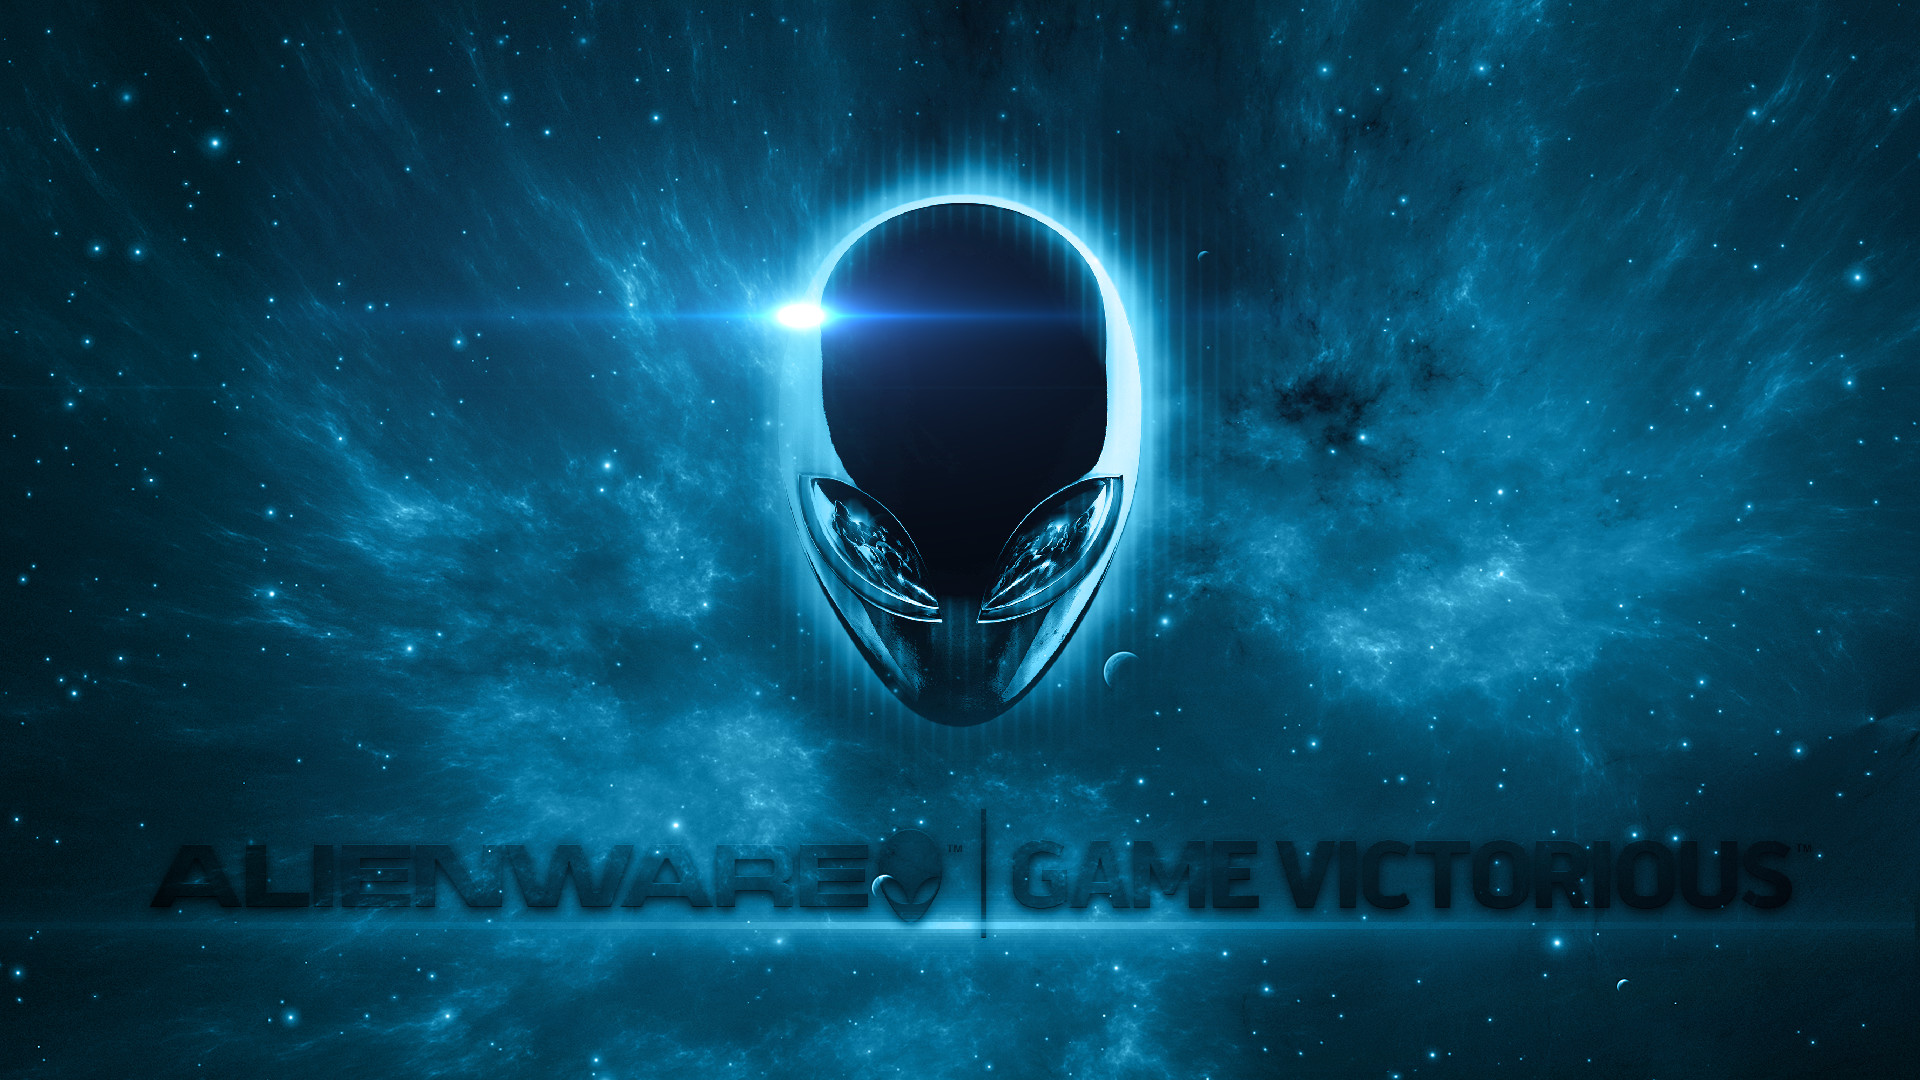 1920x1080  Alienware Wallpapers And Background Images - Stmed.net, #21 of 93